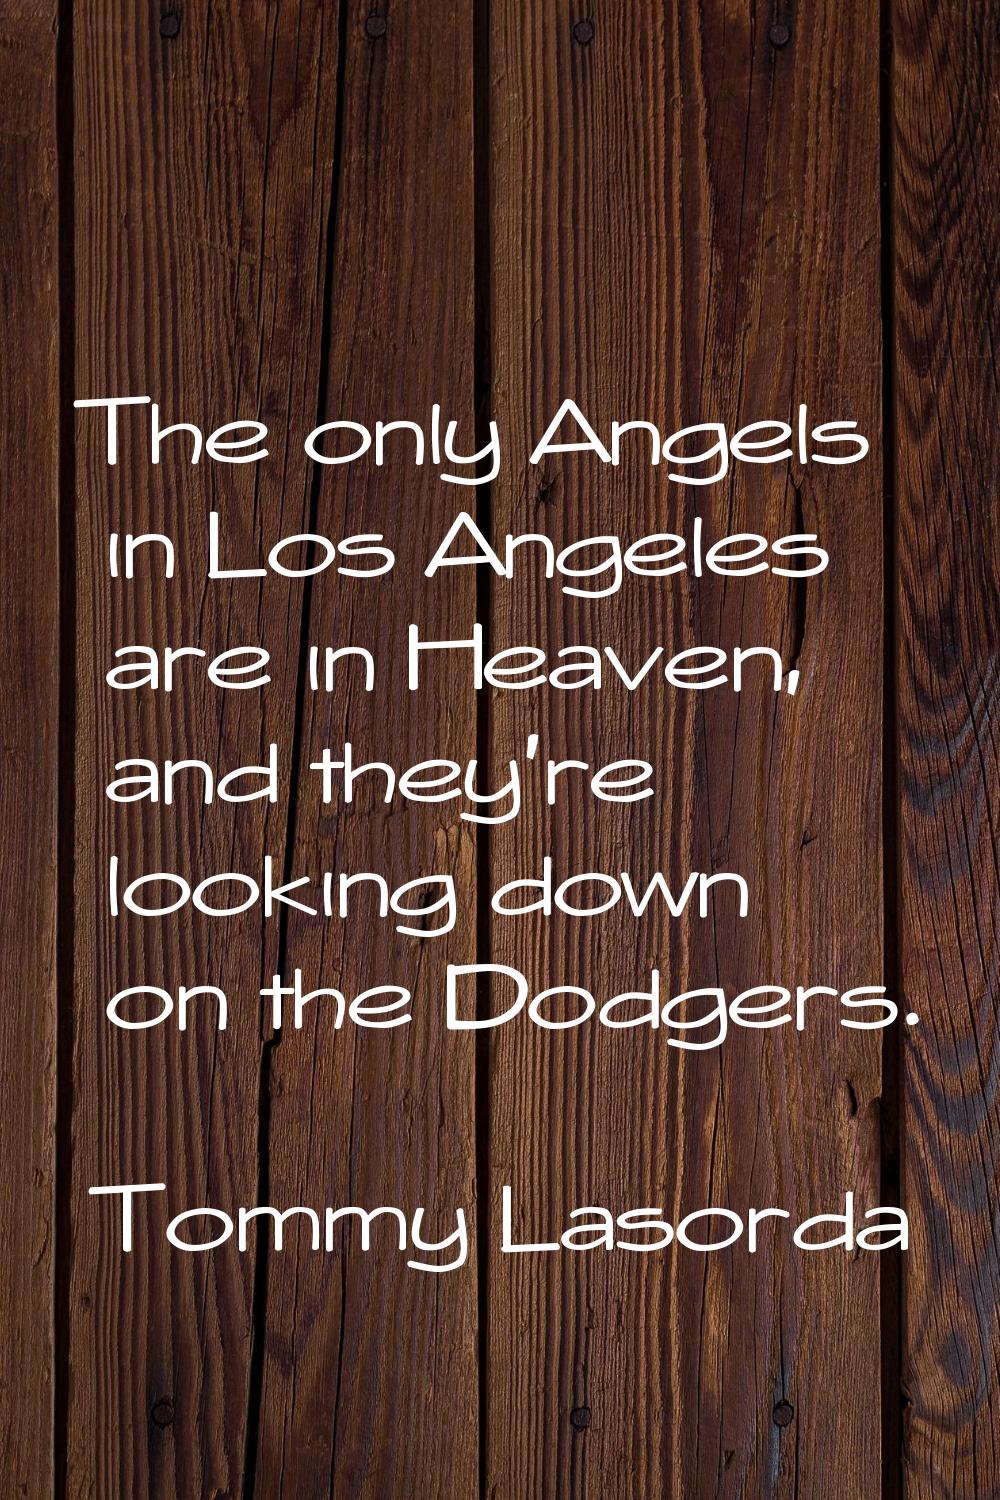 The only Angels in Los Angeles are in Heaven, and they're looking down on the Dodgers.